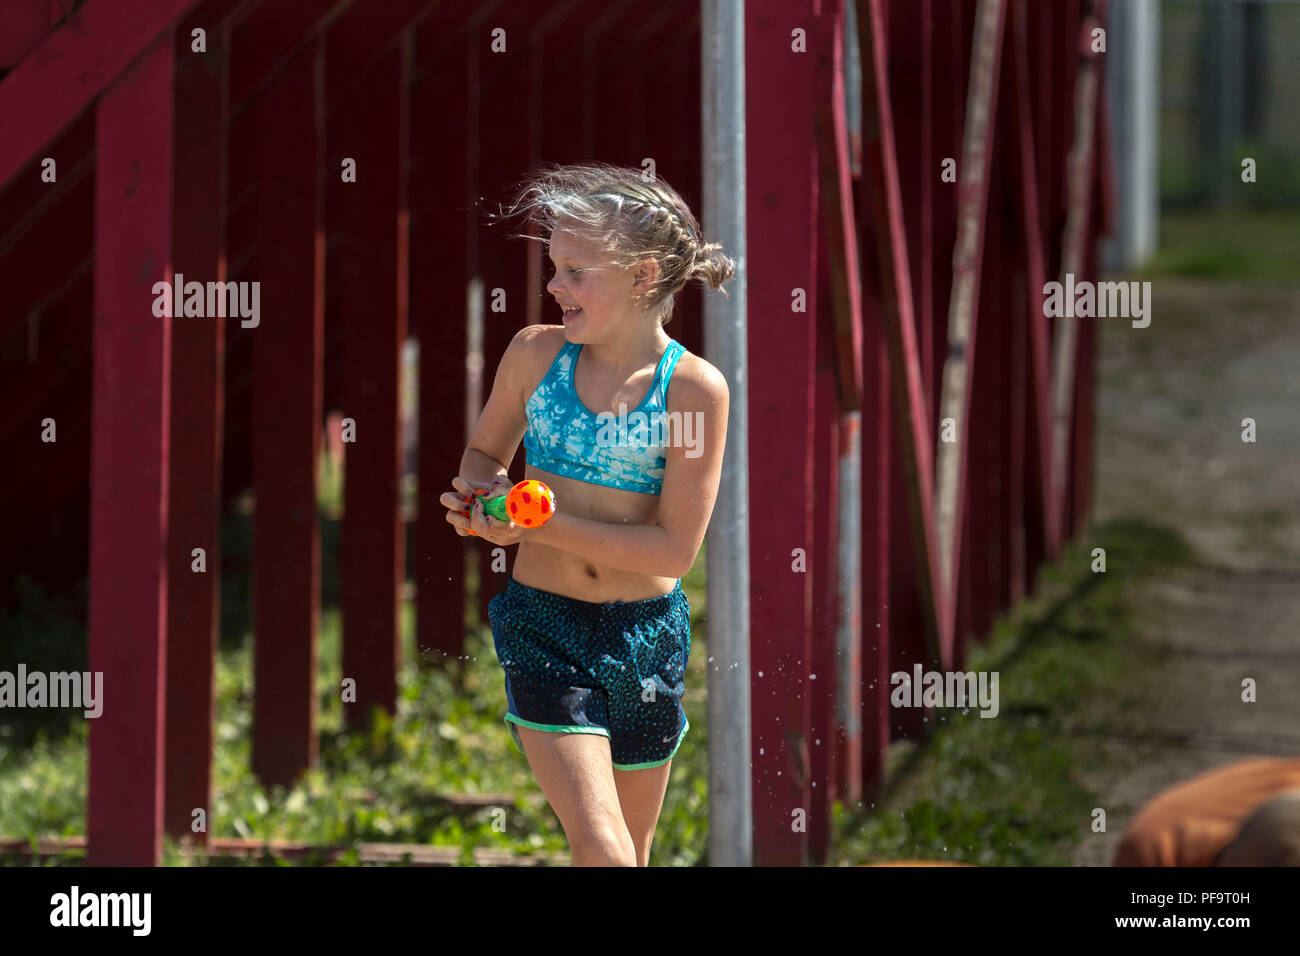 Summer time fun, kids and adults using pails, squirt guns and soakers, in a water fight. Smiling blonde with water gun, laughing. Model Released, Stock Photo